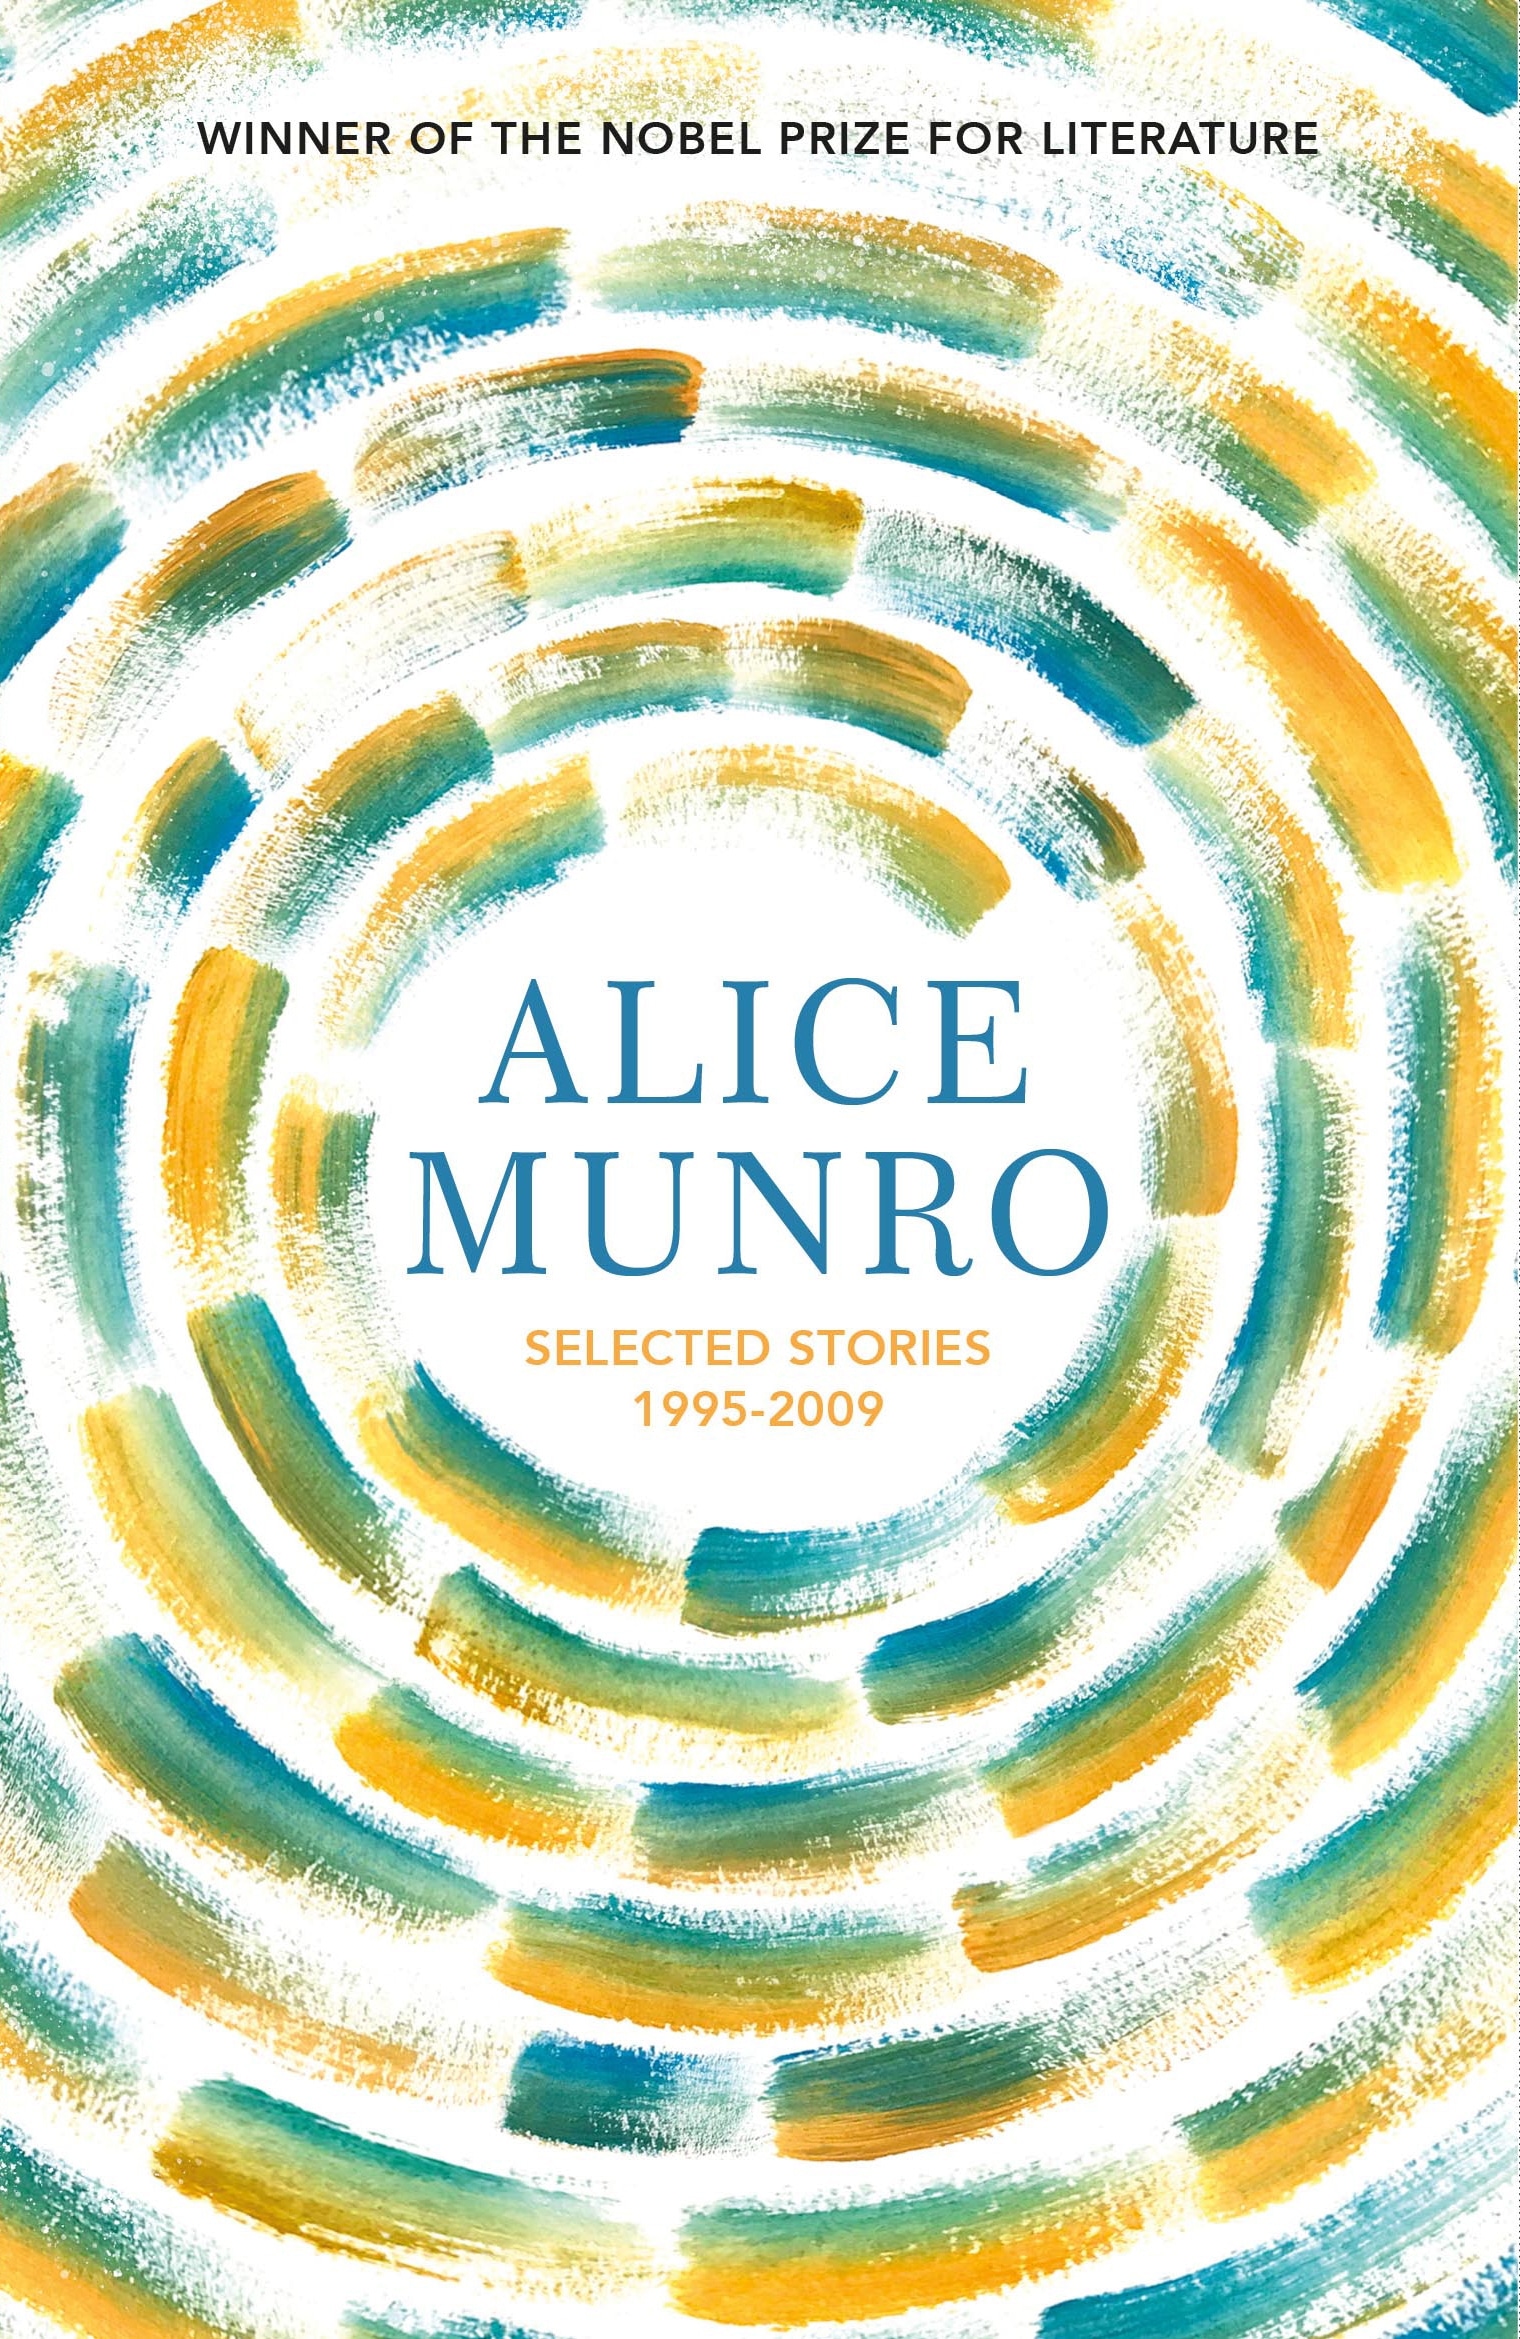 Book “Selected Stories Volume Two: 1995-2009” by Alice Munro — June 10, 2021